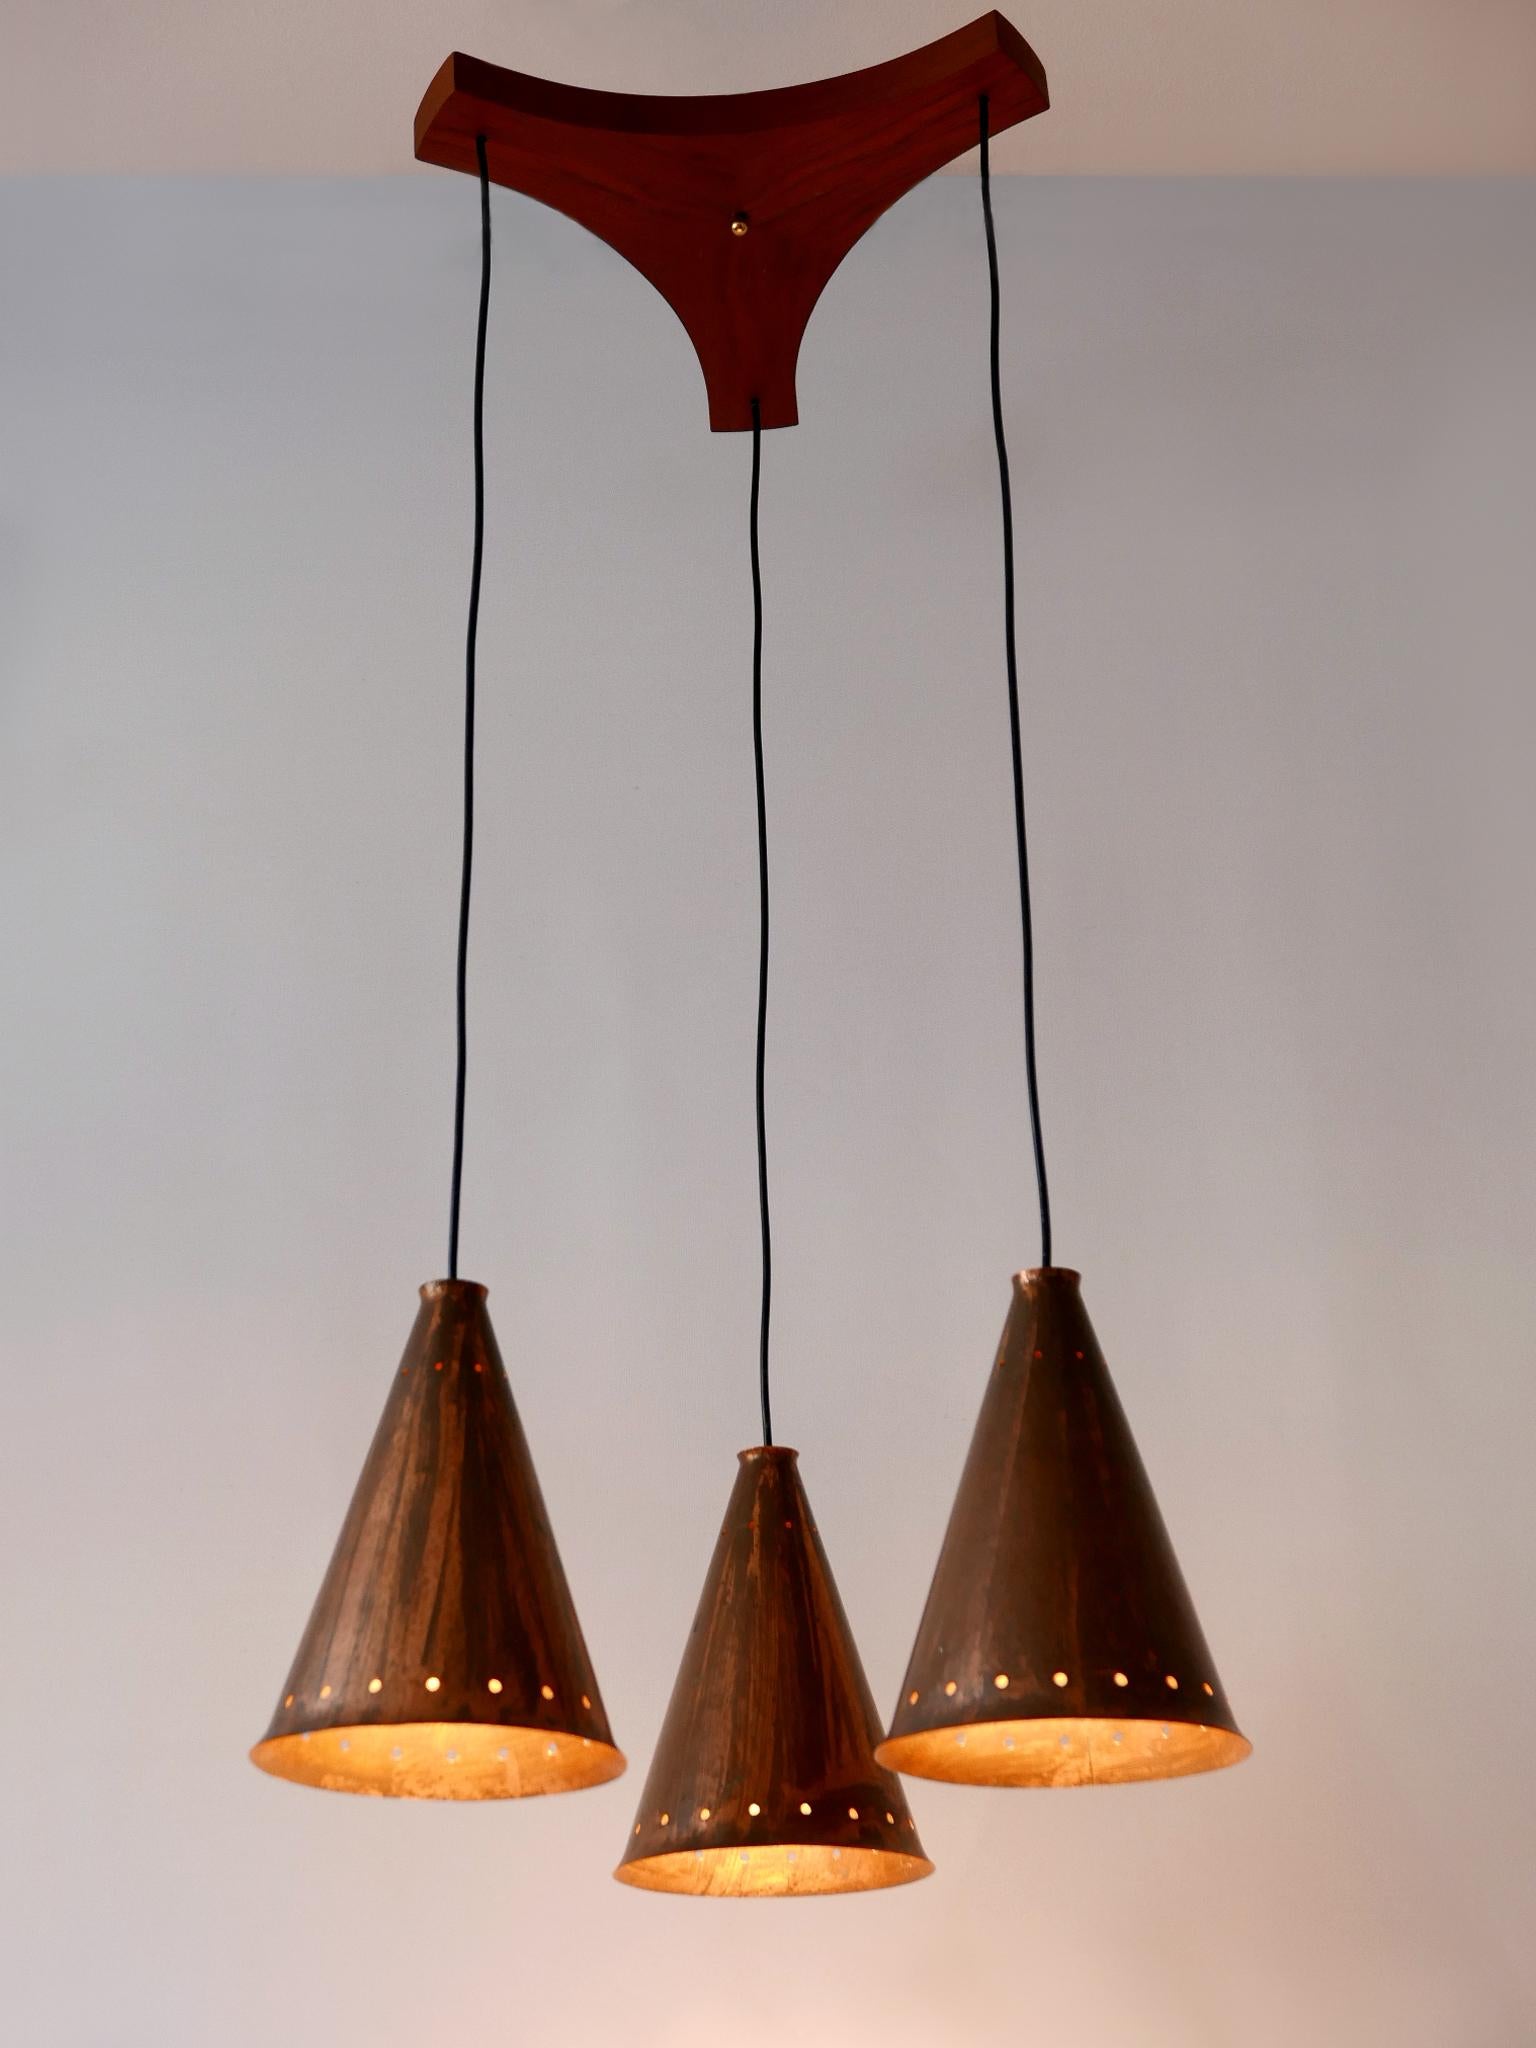 Mid-20th Century Exceptional & Large Mid-Century Modern Copper Pendant Lamp Scandinavia, 1950s For Sale